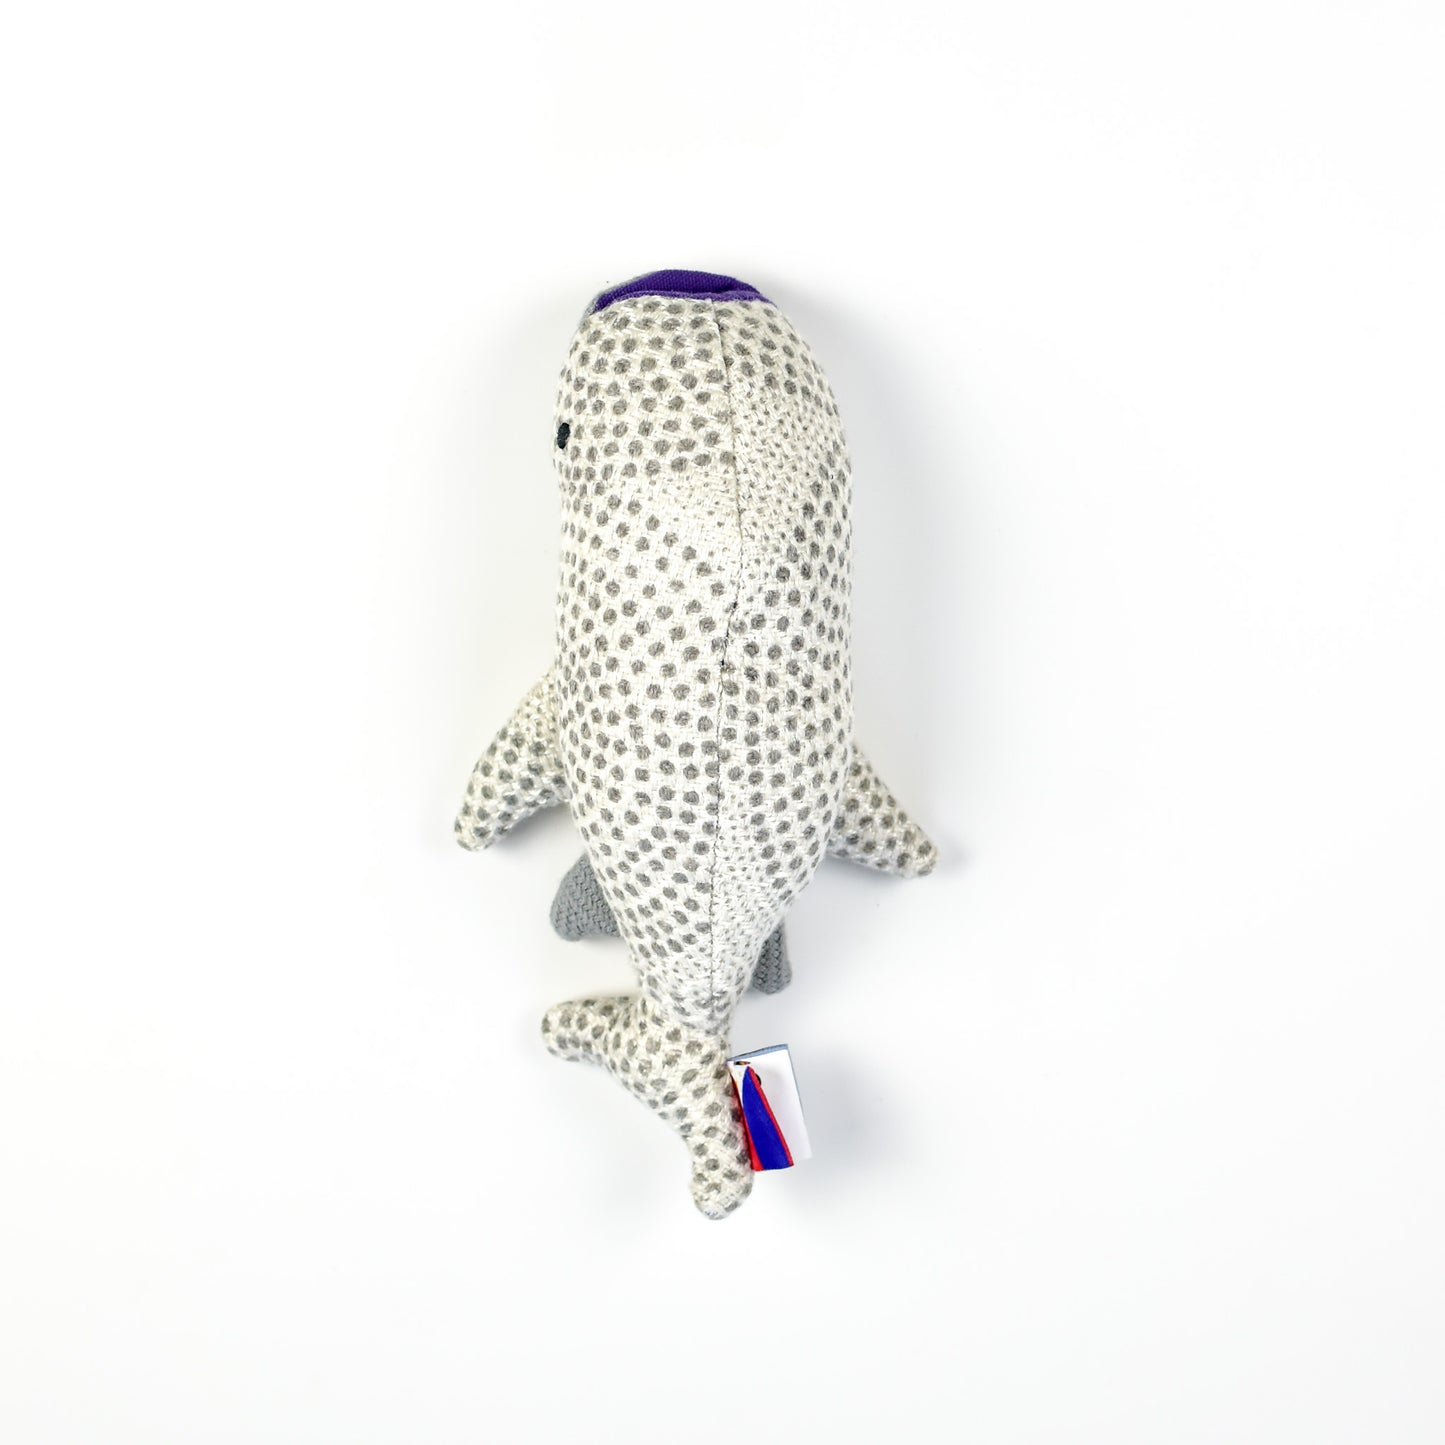 Dolphin Plush Toy Recycled Fabric